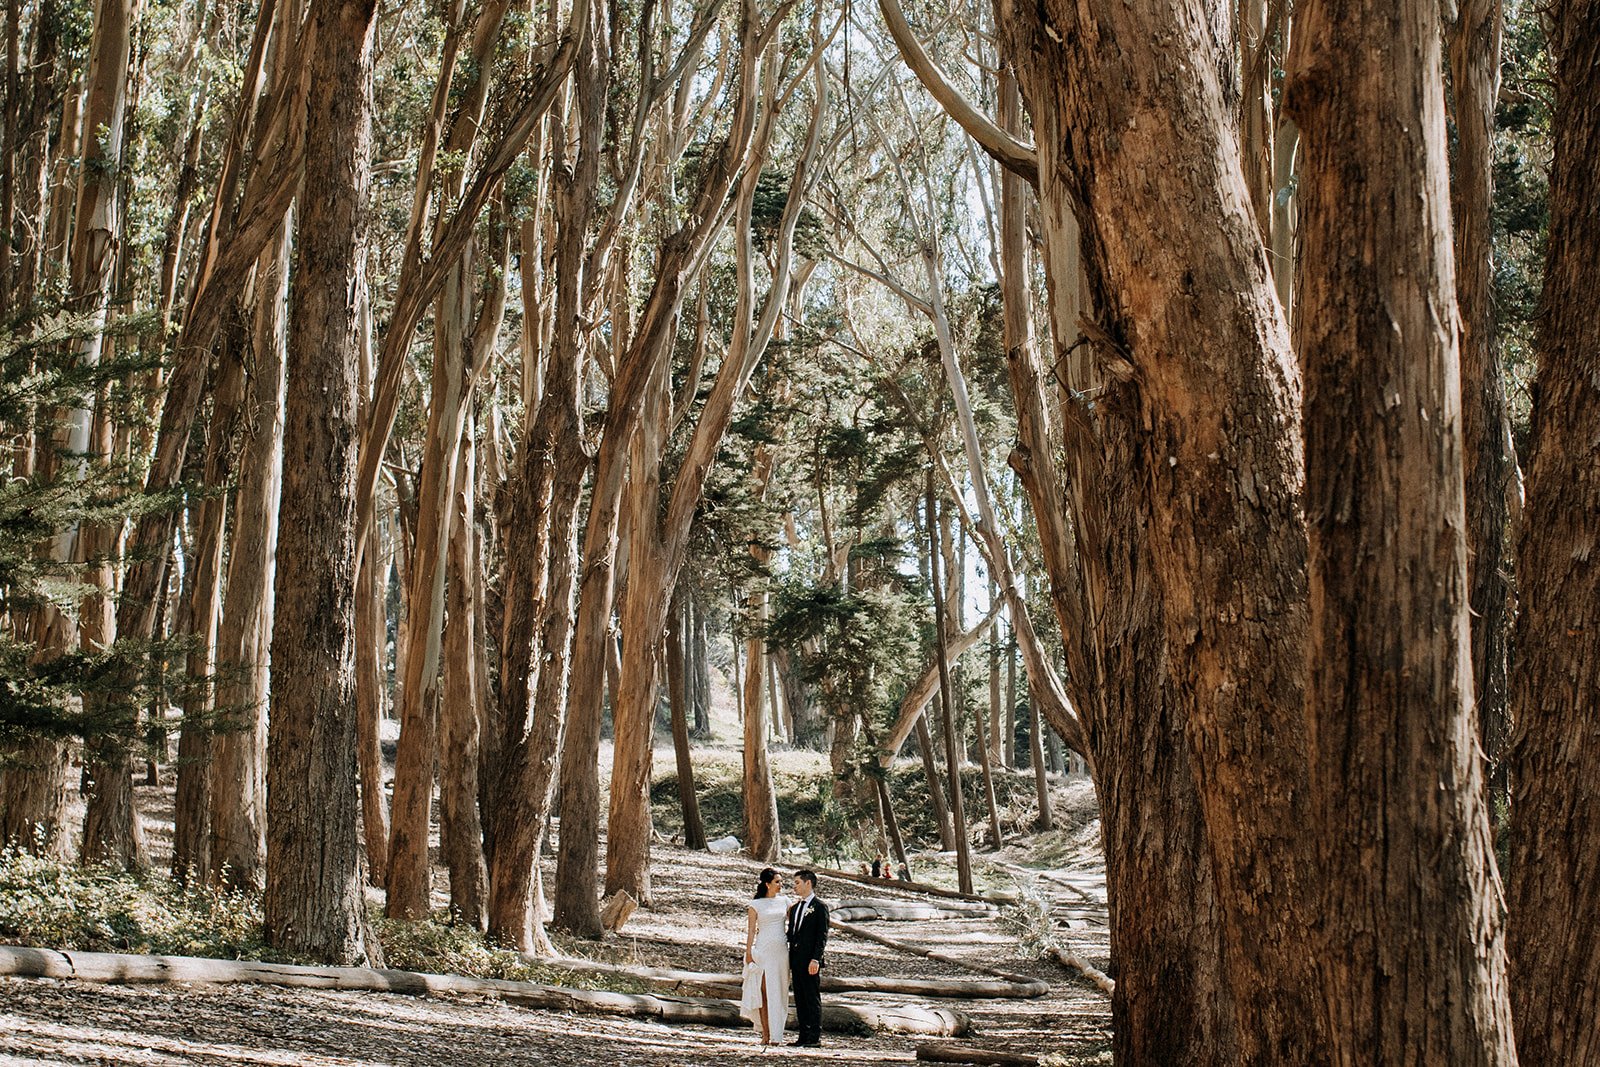  bride and groom on forest path with surrounding trees  